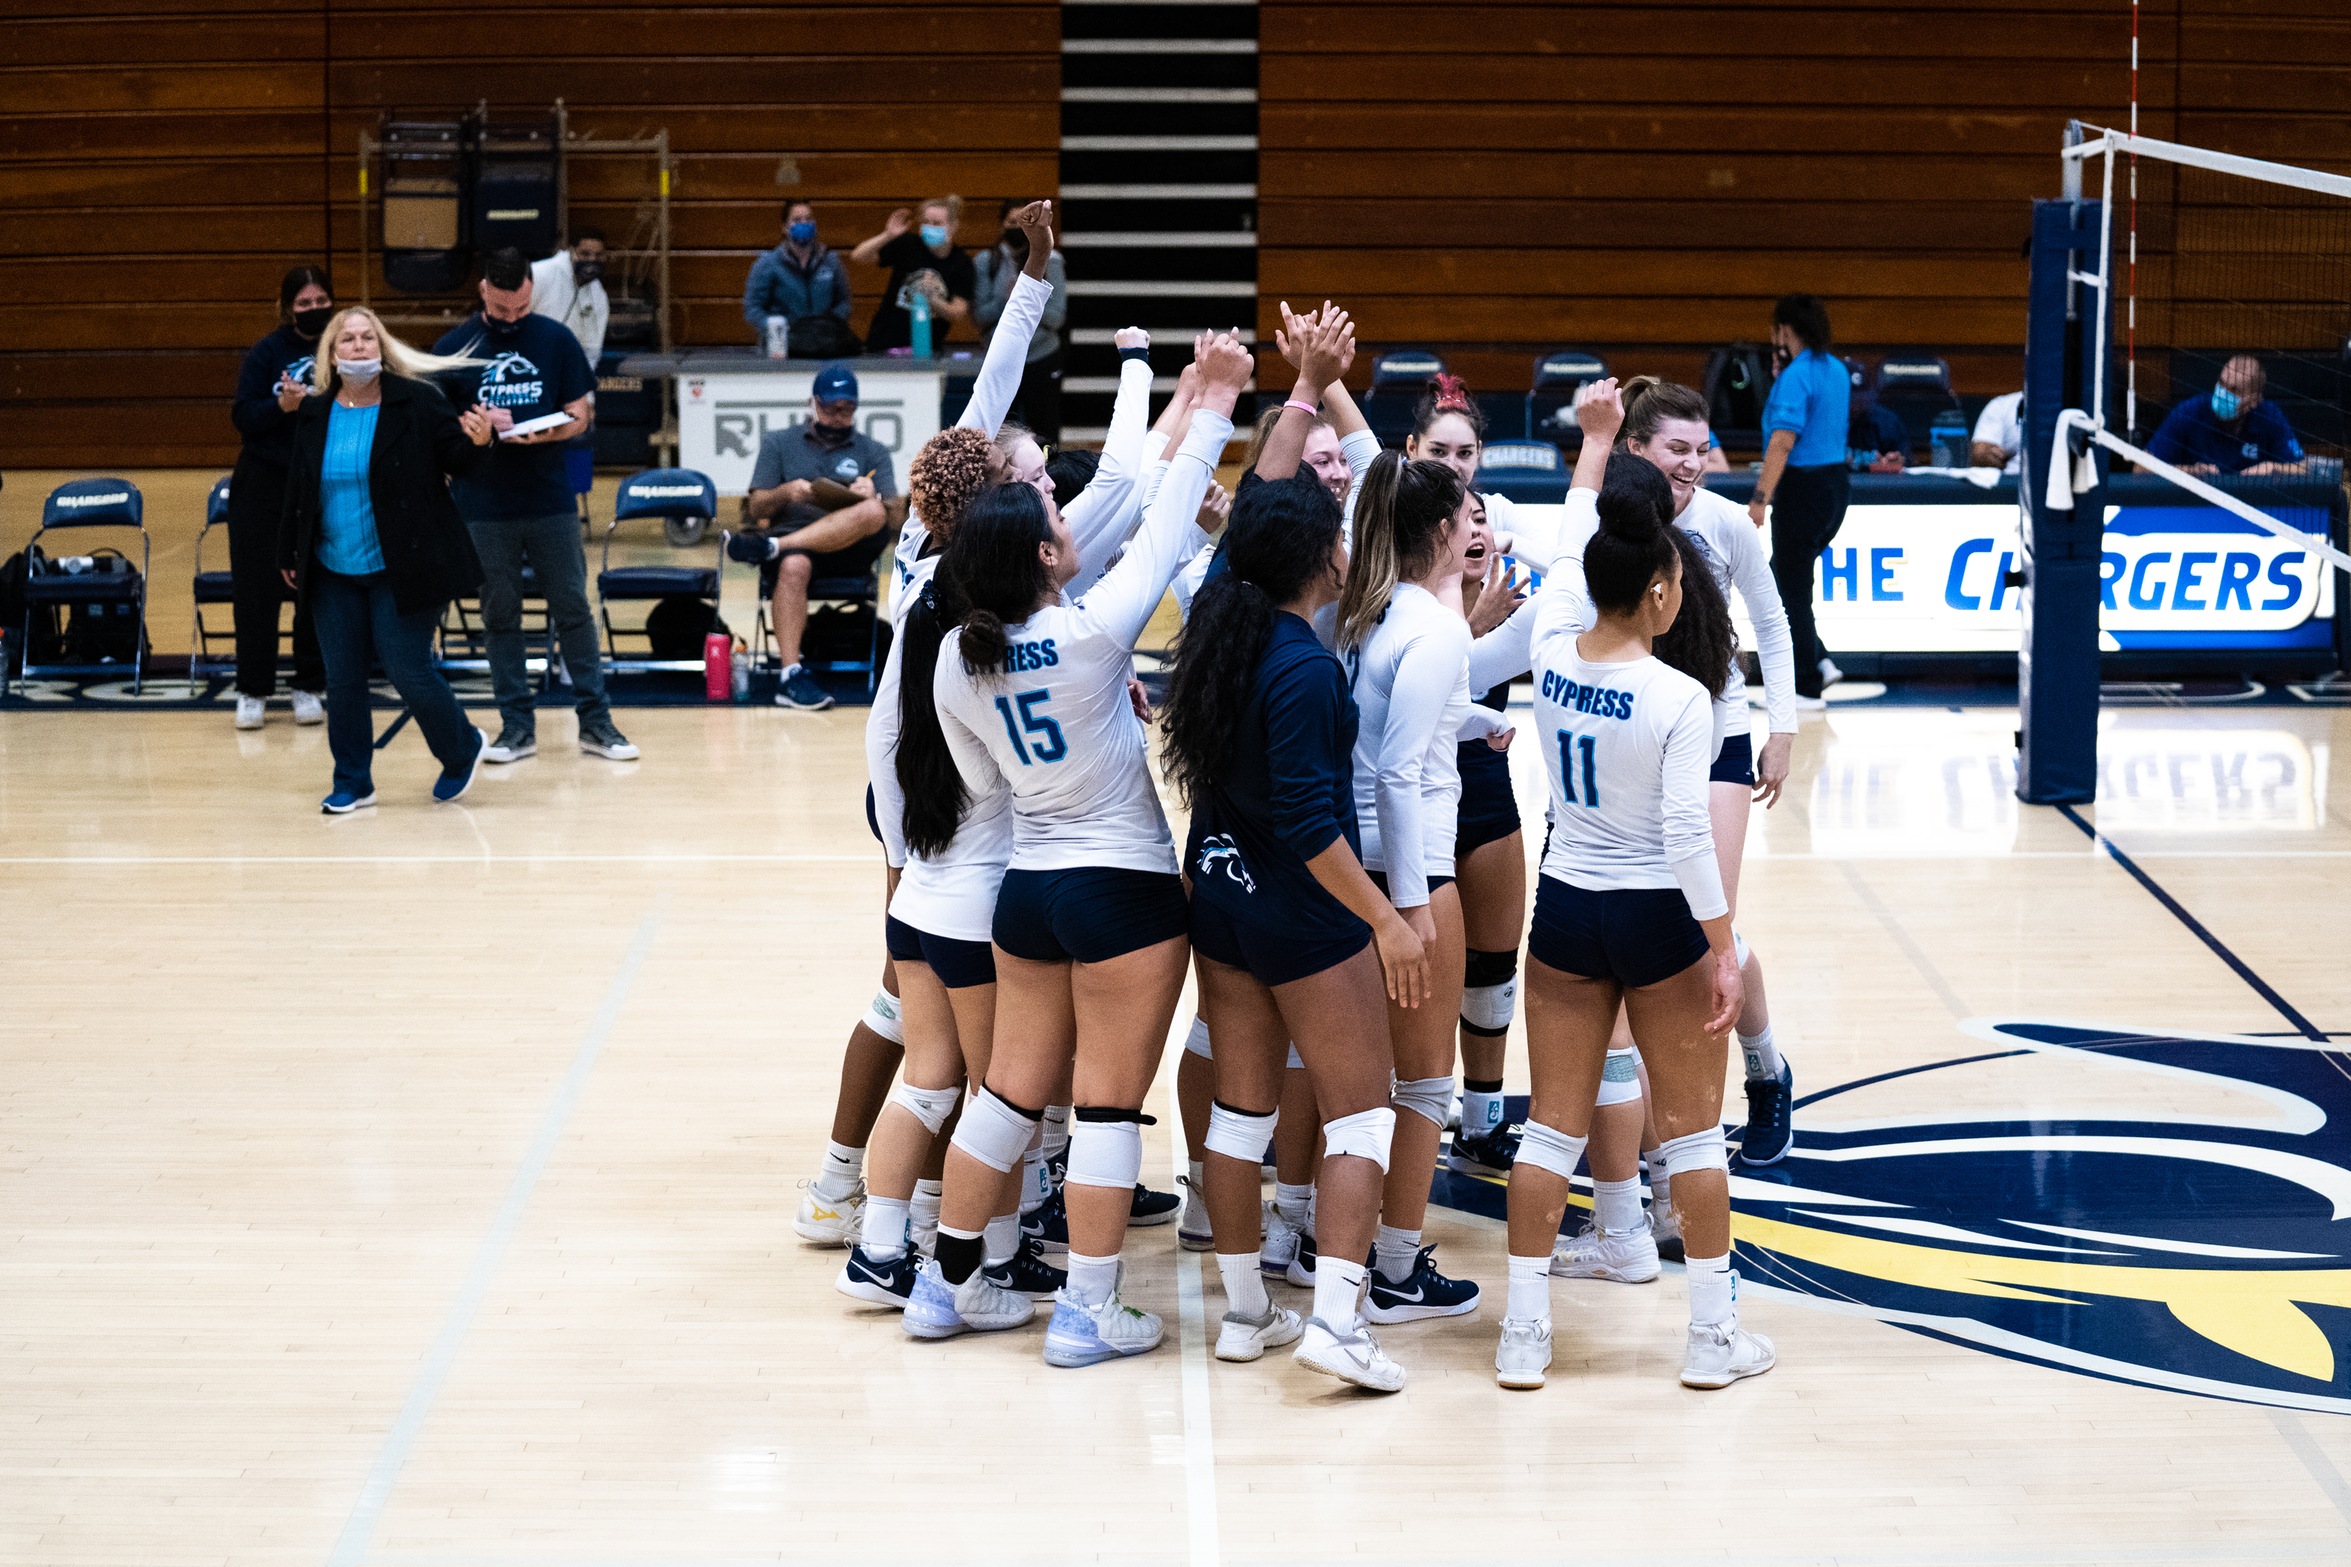 #4 Cypress Volleyball to Host Round 1 of CCCAA Playoffs on 11/23